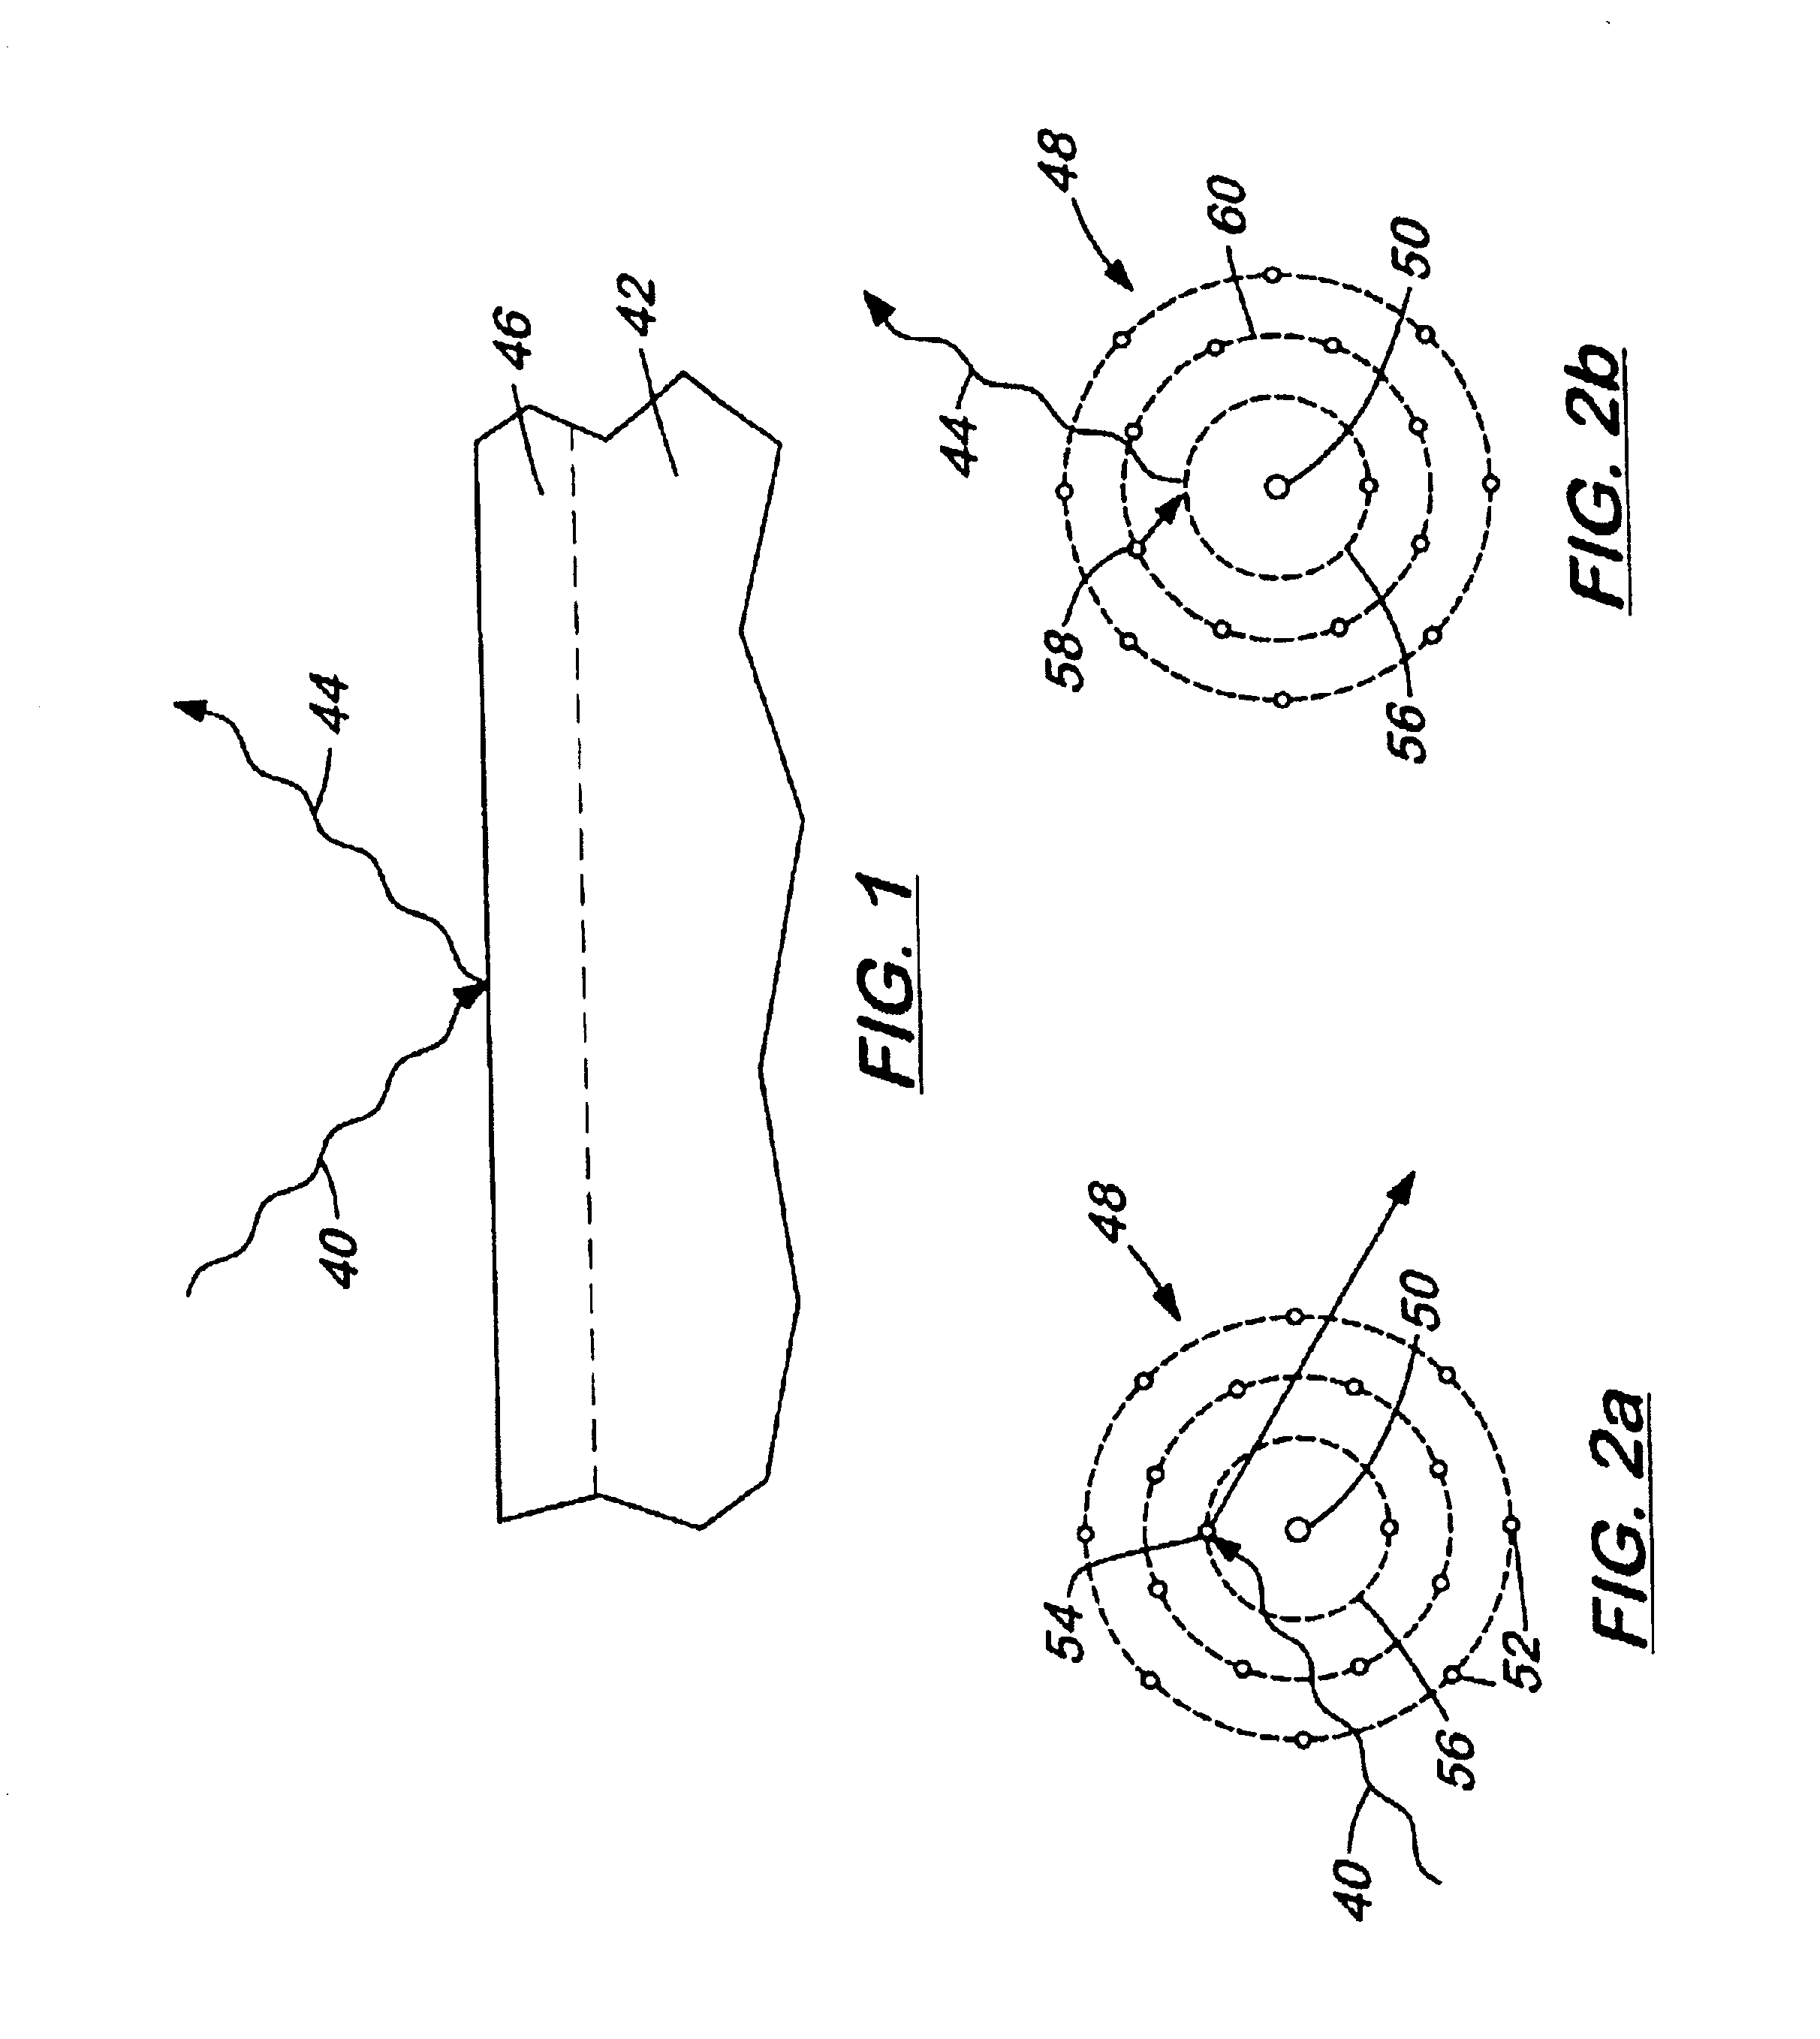 Methods for identification and verification using vacuum XRF system